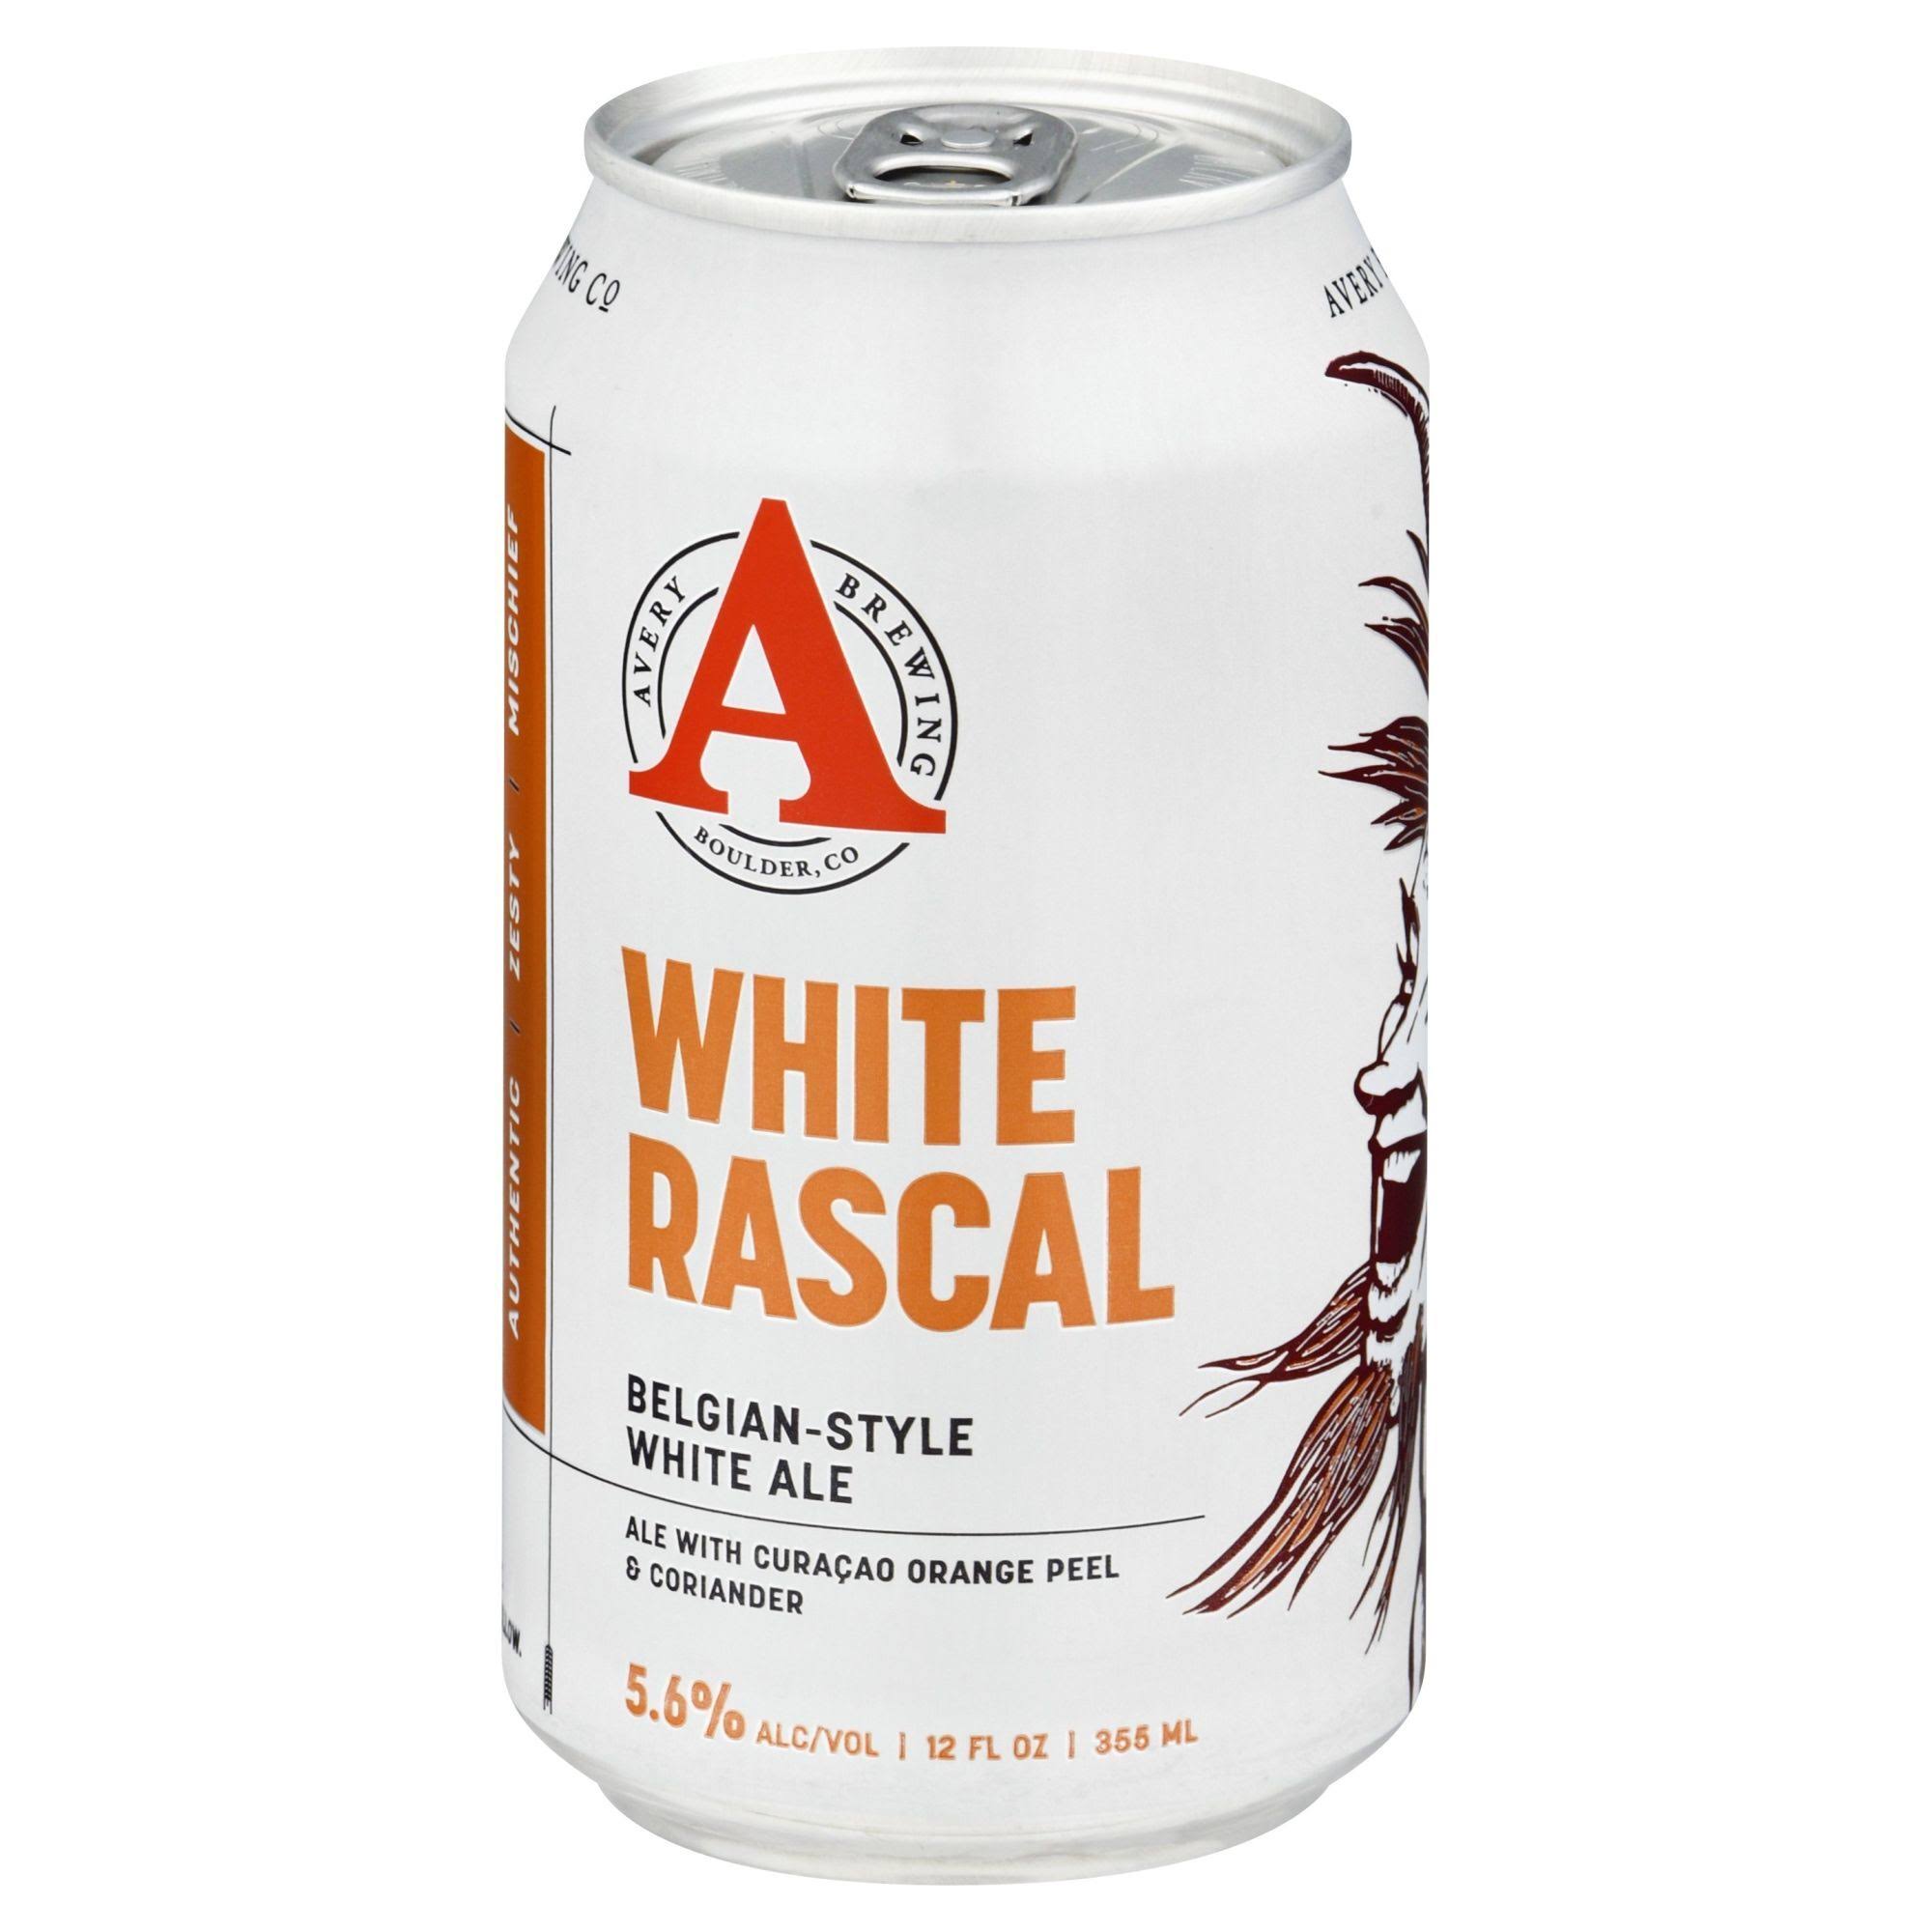 Avery White Rascal Beer - 6 pack, 12 fl oz cans